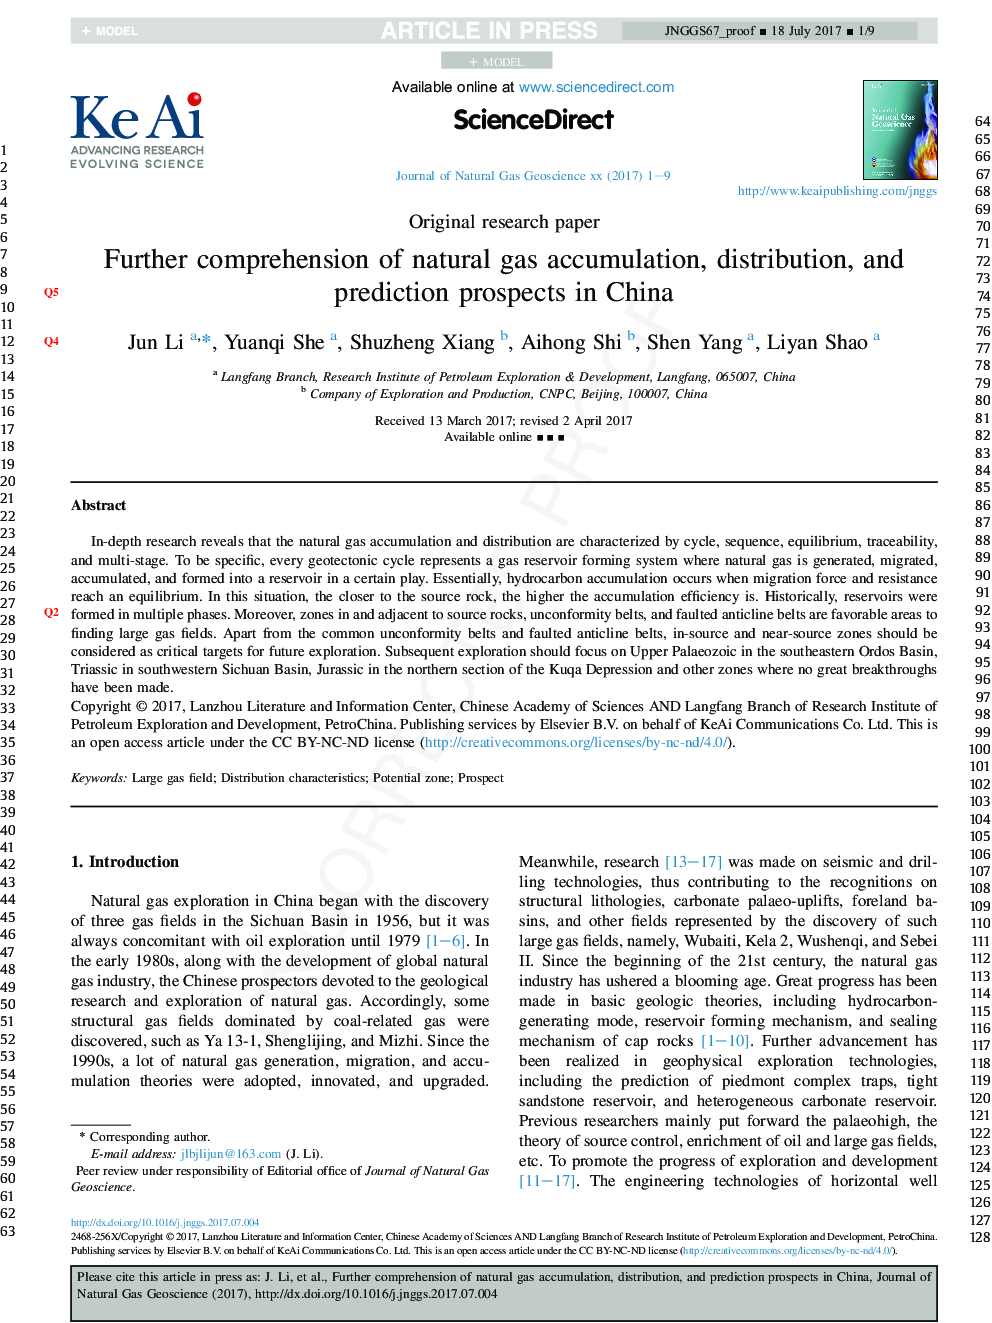 Further comprehension of natural gas accumulation, distribution, and prediction prospects in China